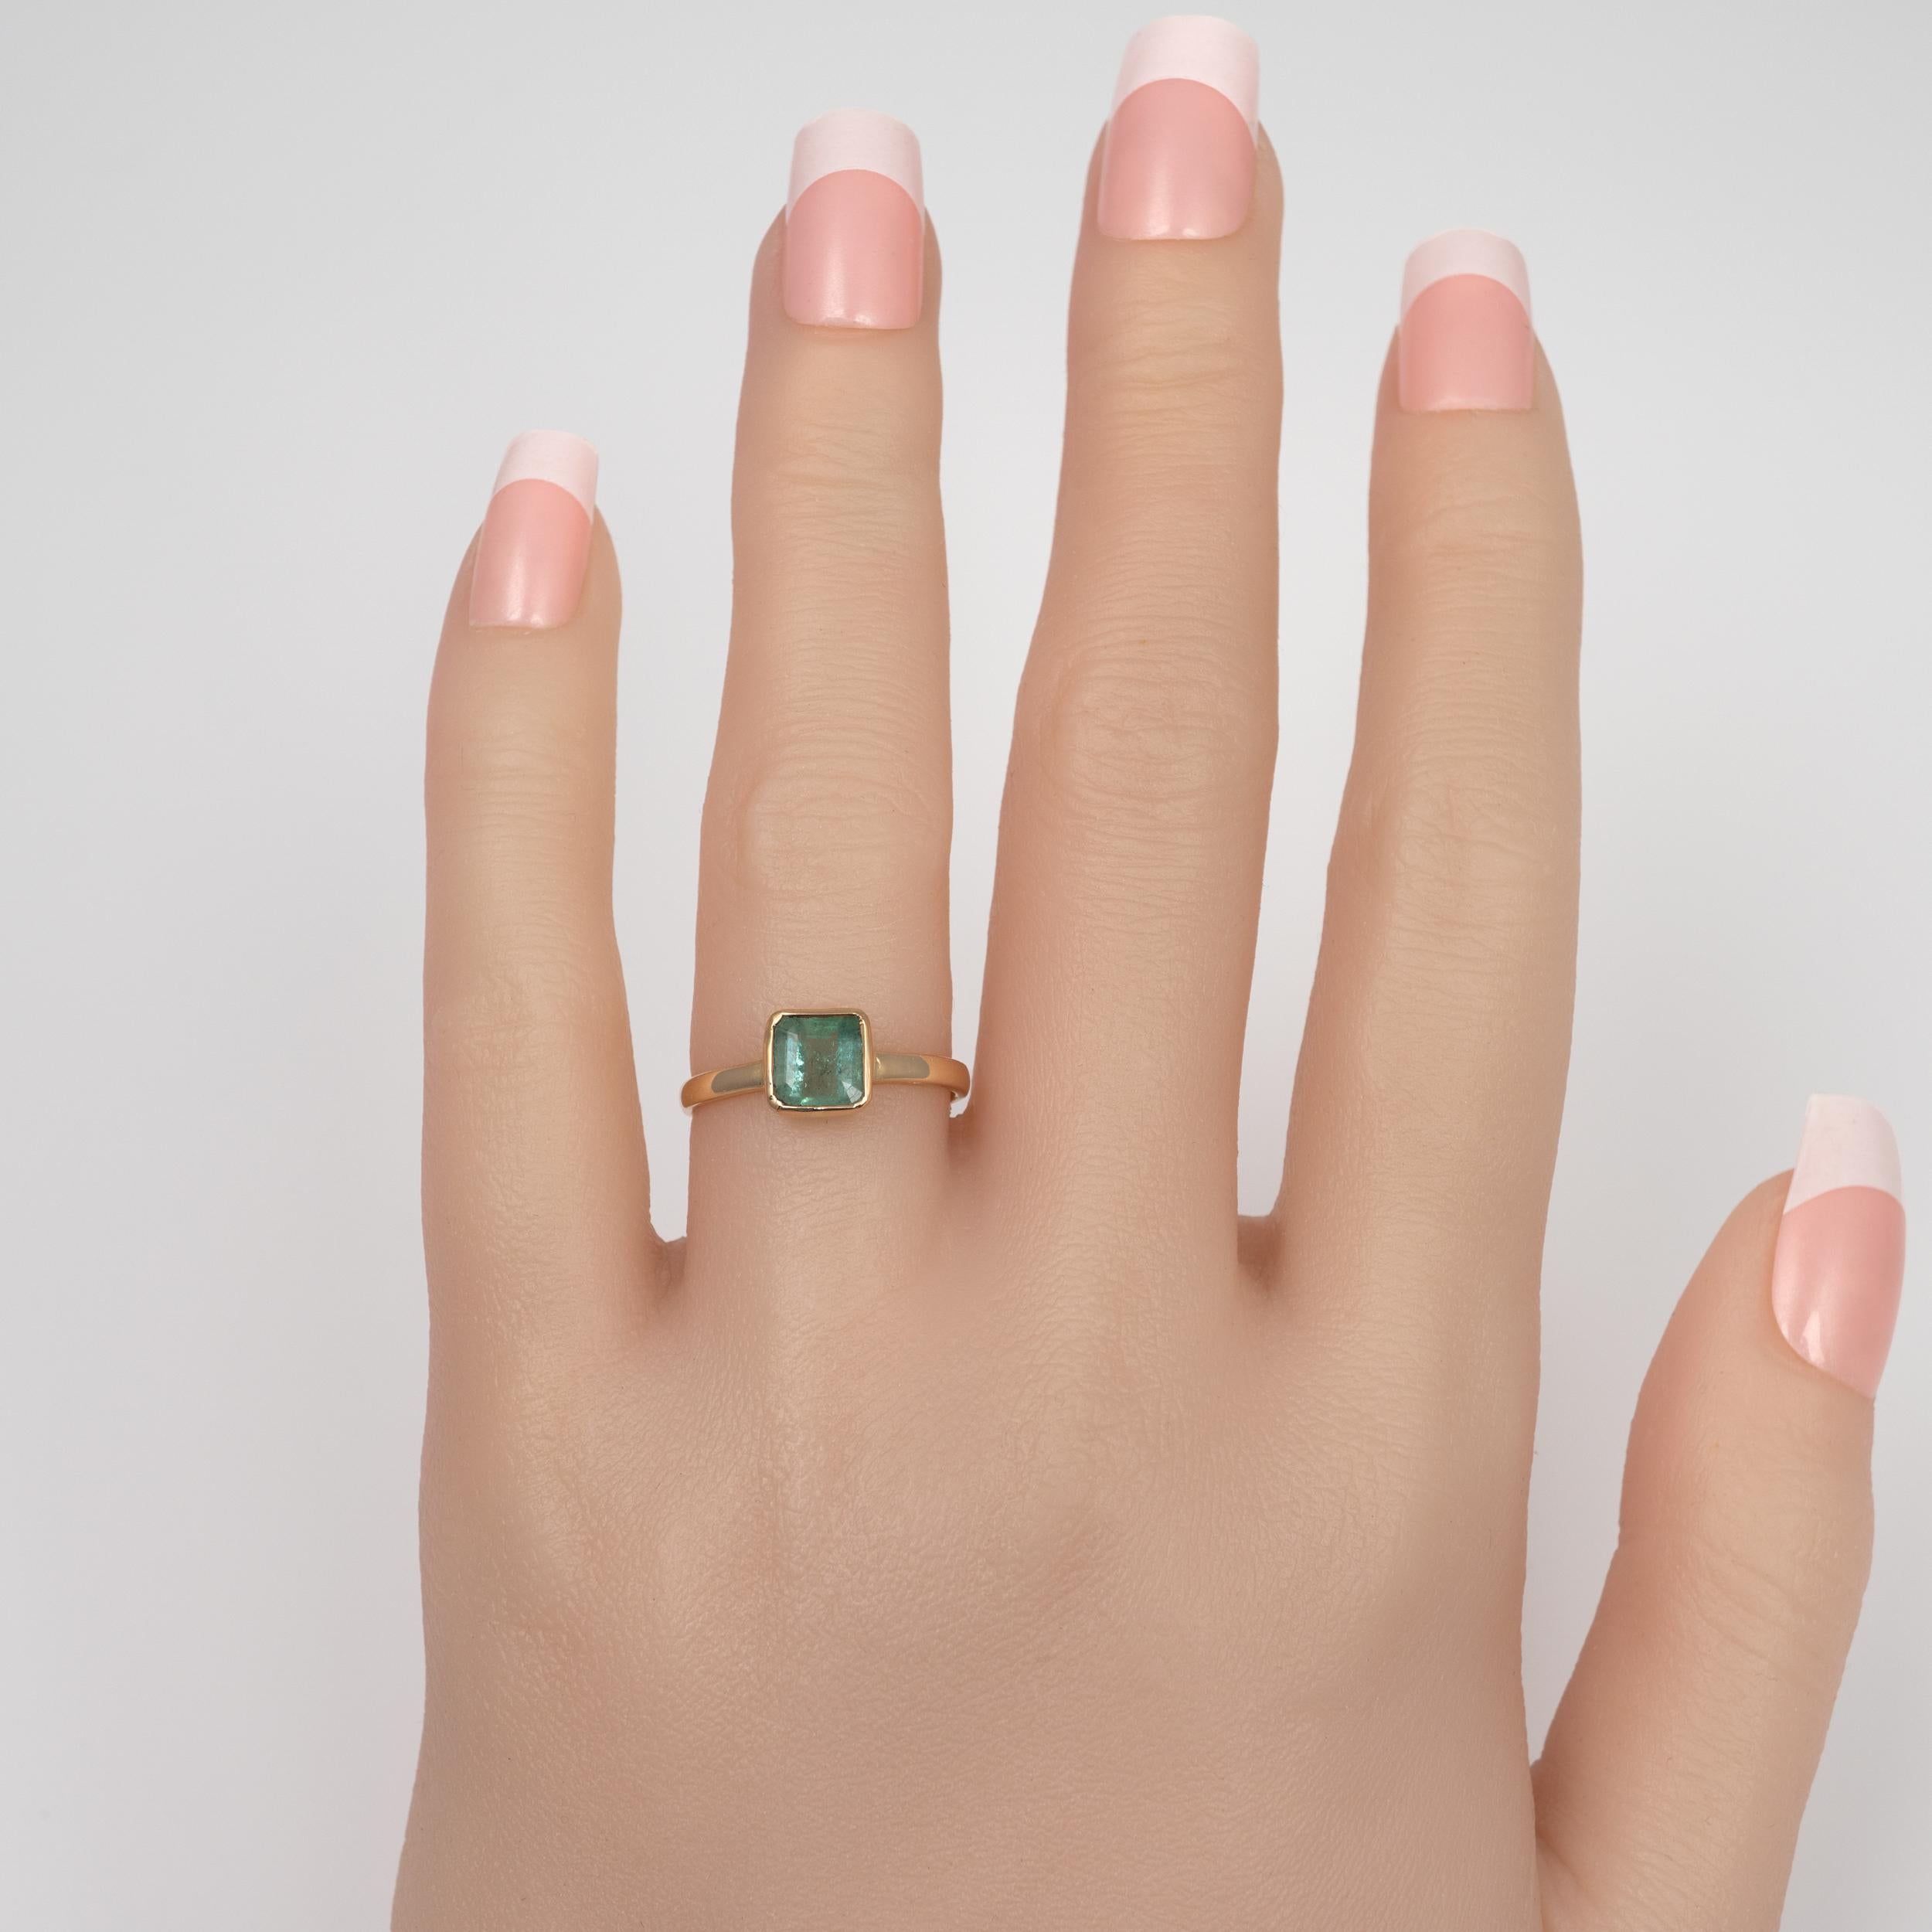 A beautiful modern Bezel Emerald solitaire ring 18 karat yellow gold.

The octagon square precious emerald gemstone is bezel set in a contemporary minimalistic style. The yellow gold is hallmarked and the ring is polished to a beautiful finish.The